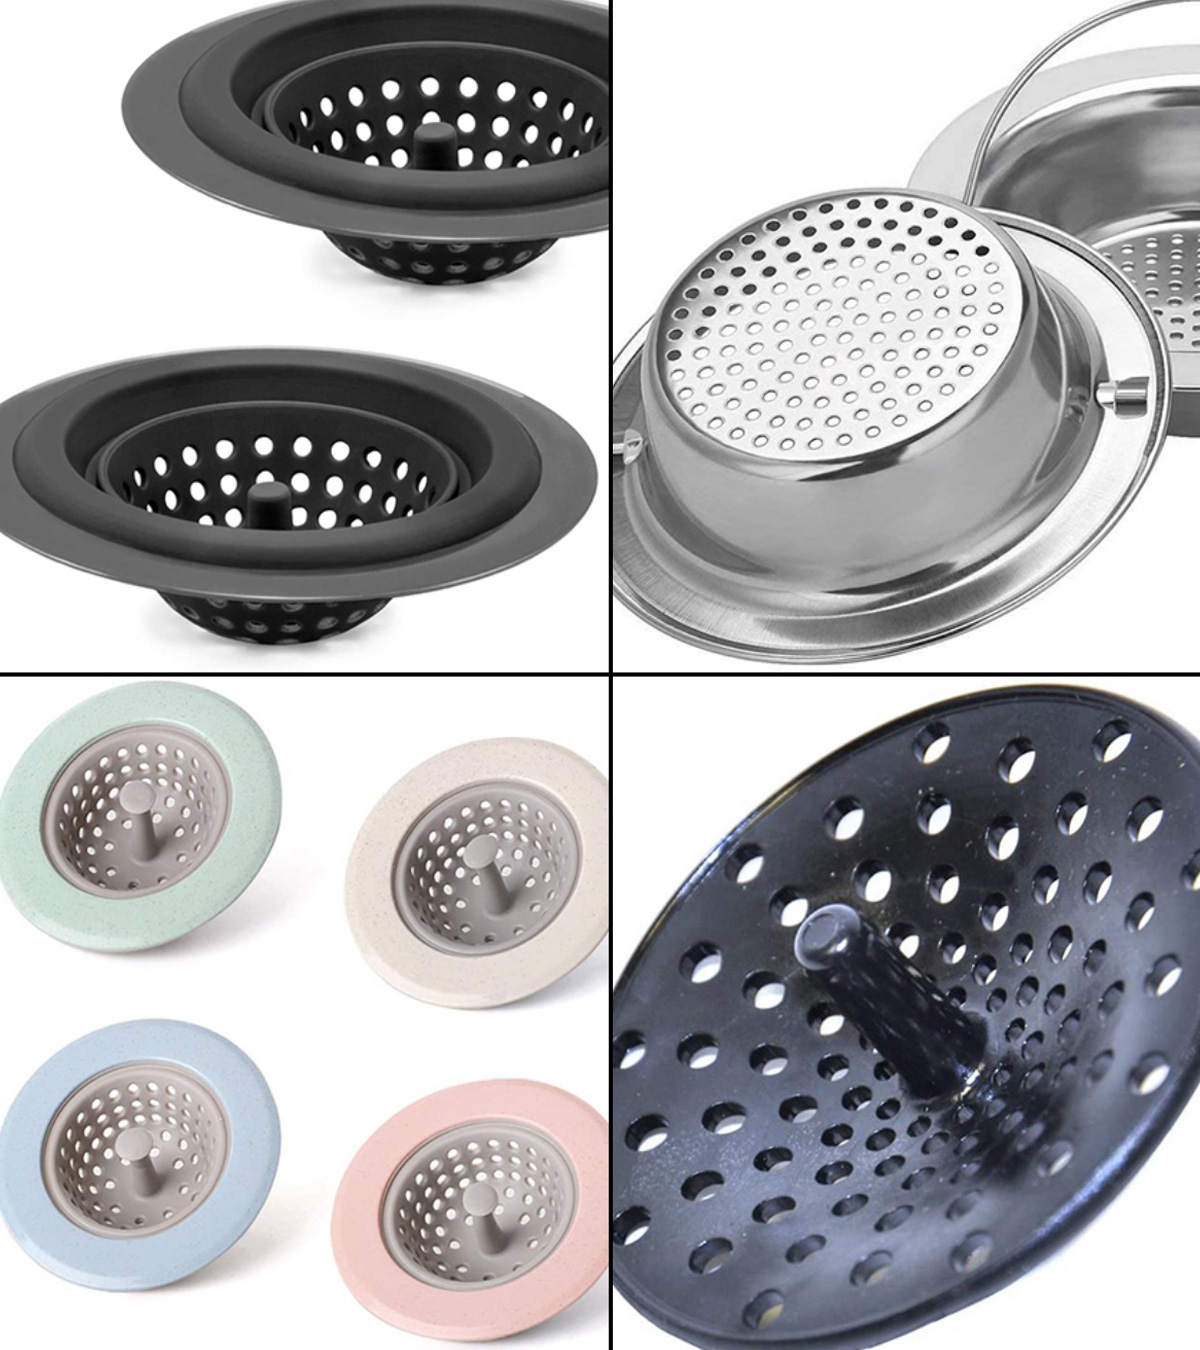 2 pcs set Sink Strainers Stainless Metal Kitchen Sink Strainer Stopper New 